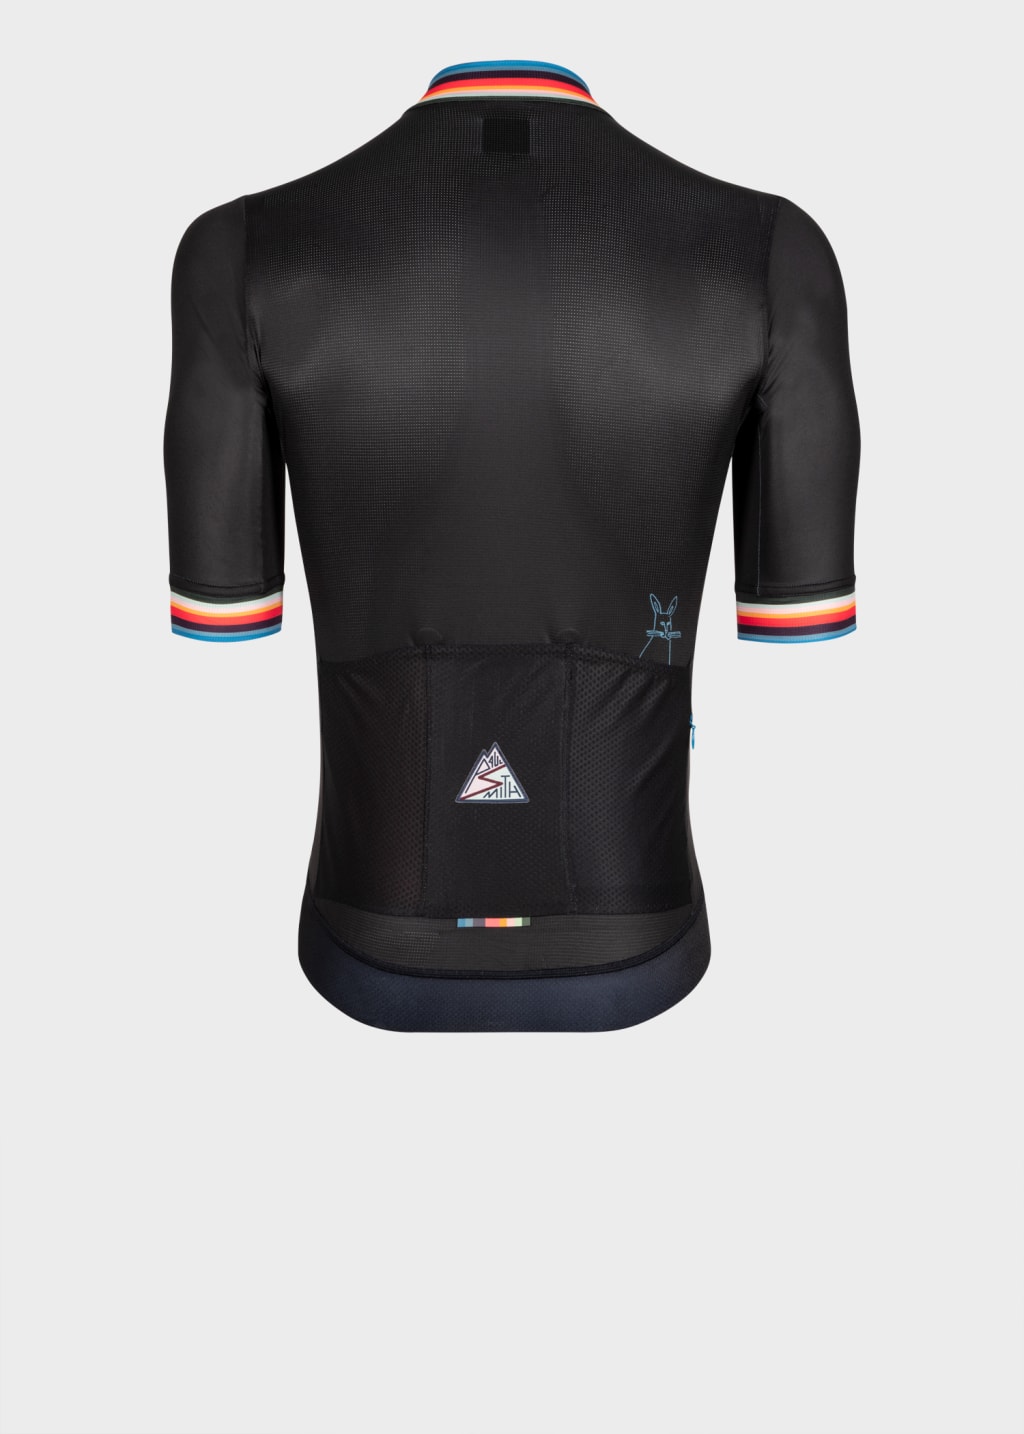 Product View - Men's Black Race Fit Cycling Jersey With 'Artist Stripe' Trims by Paul Smith